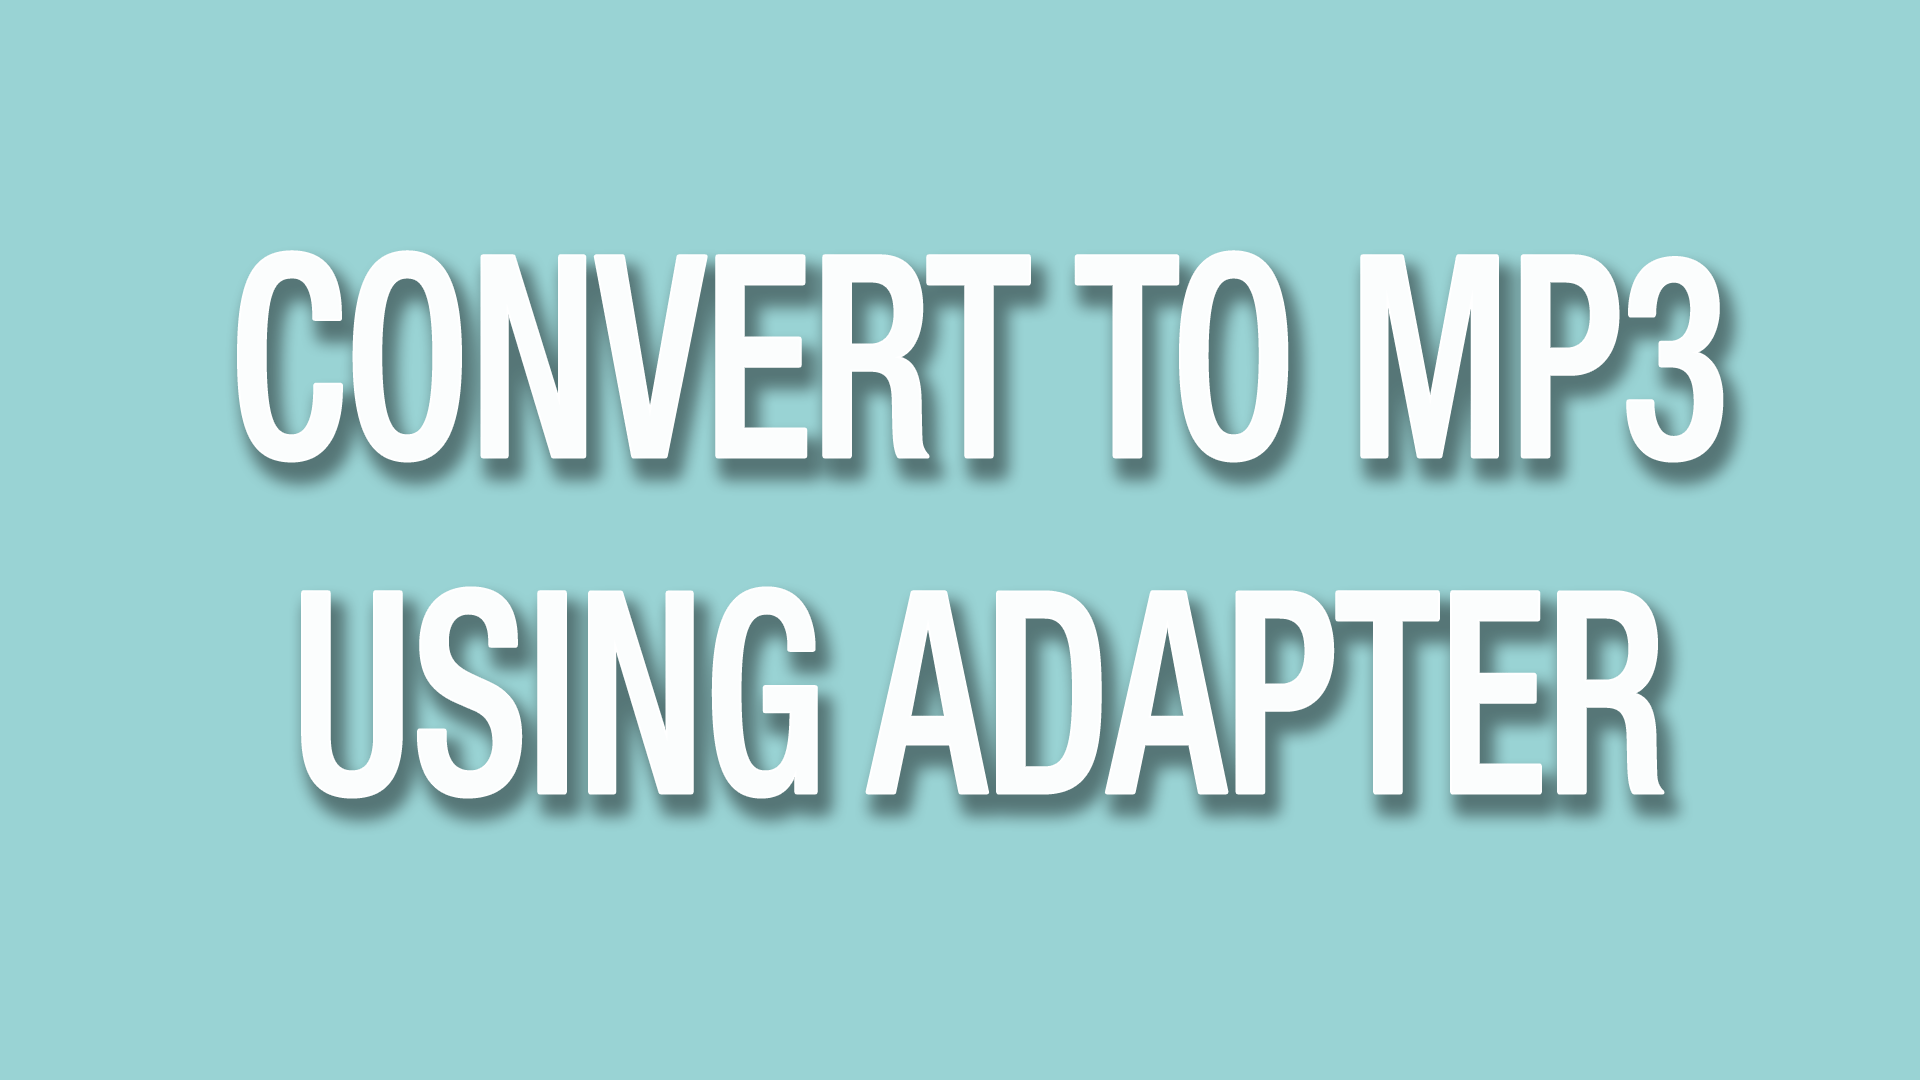 Convert to MP3 using Adapter